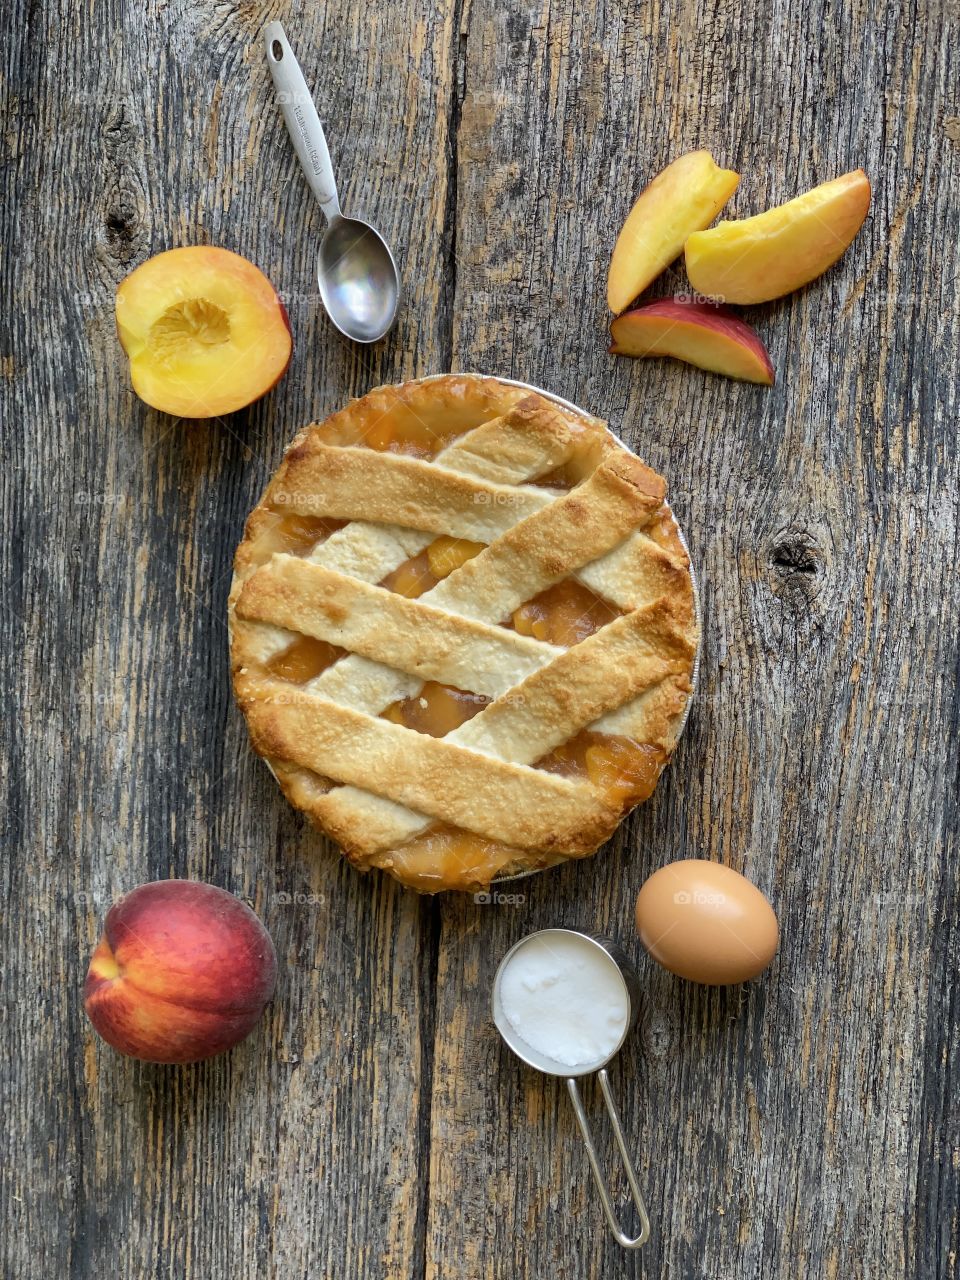 A freshly baked peach pie cooling down on a wooden table a perfect summertime treat!